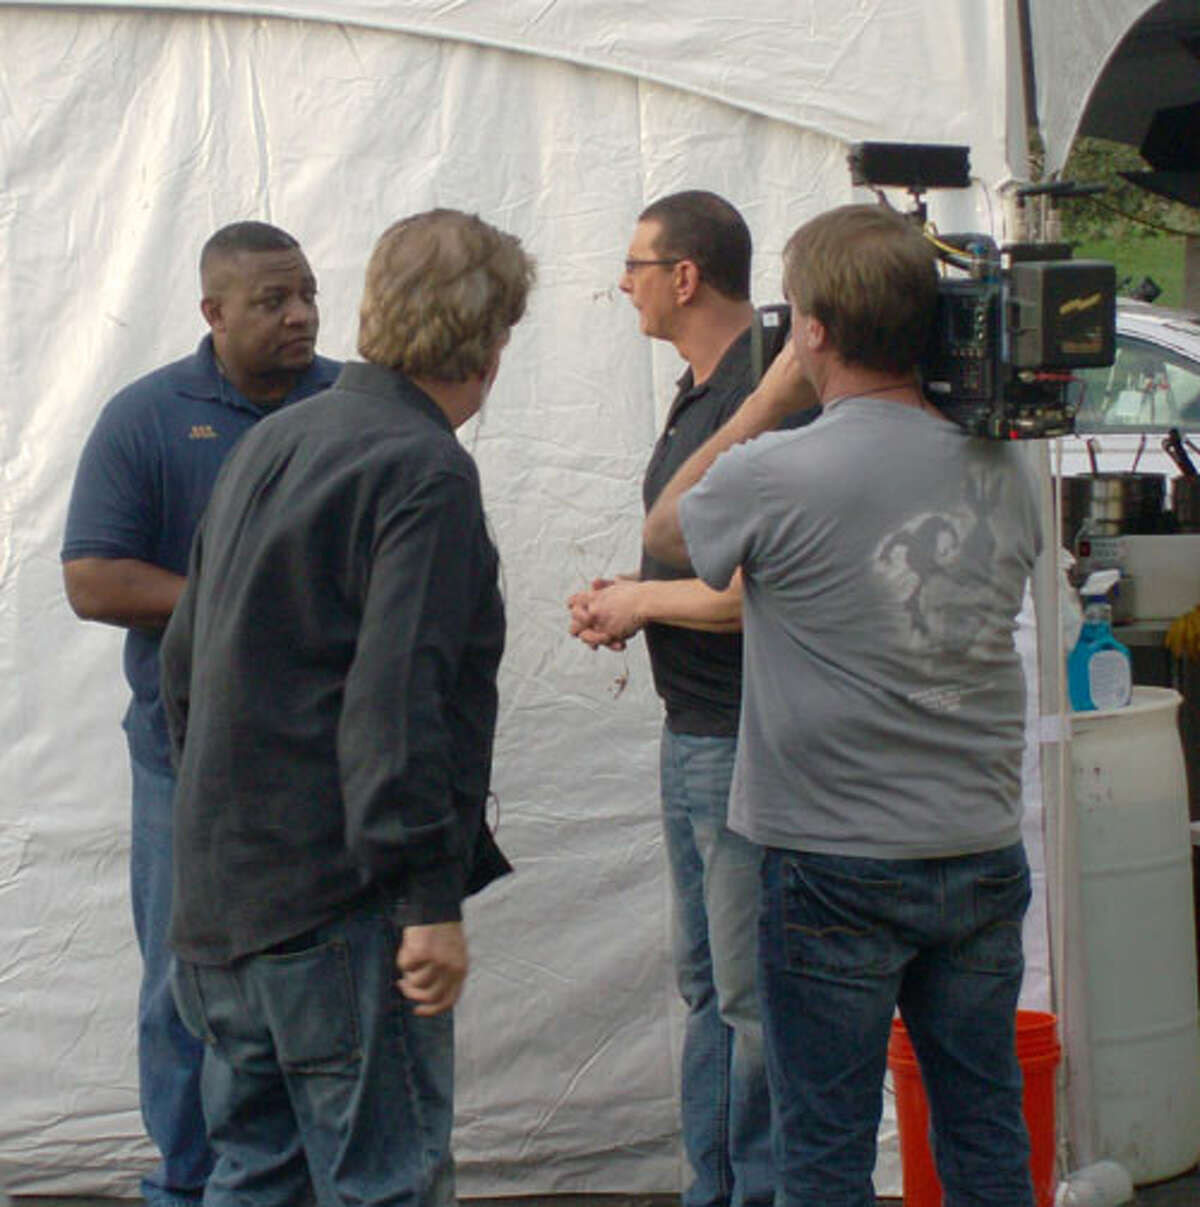 Mama Lee’s Soul Food restaurant owner Ken Lee (far left) listens to advice from TV celebrity chef Robert Irvine (rear right) Monday as television crew members tape the exchange for broadcast on Irvine’s “Kitchen Impossible” television show. Photo by Michele Gwynn